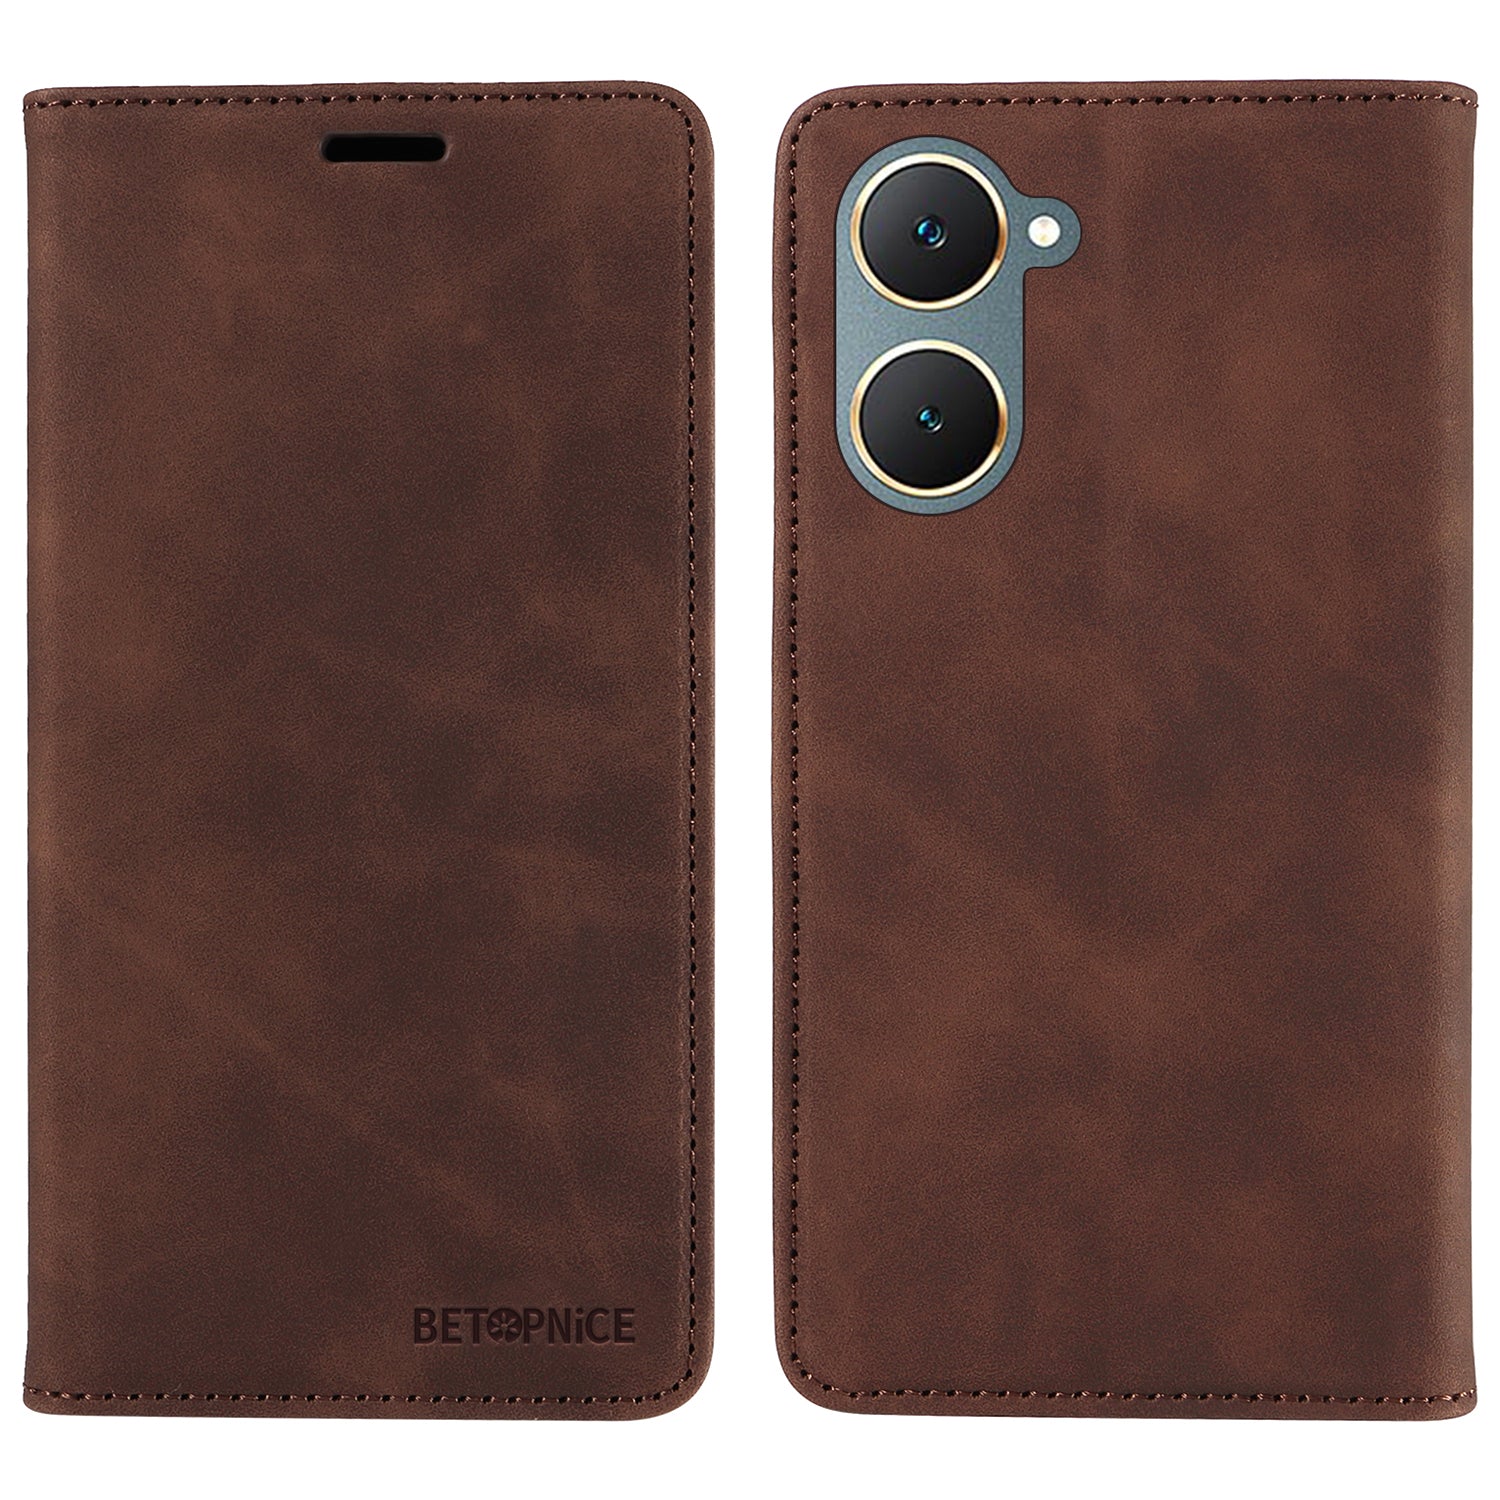 BETOPNICE 003 For vivo Y03 Case RFID Blocking Wallet Leather Flip Phone Cover - Brown